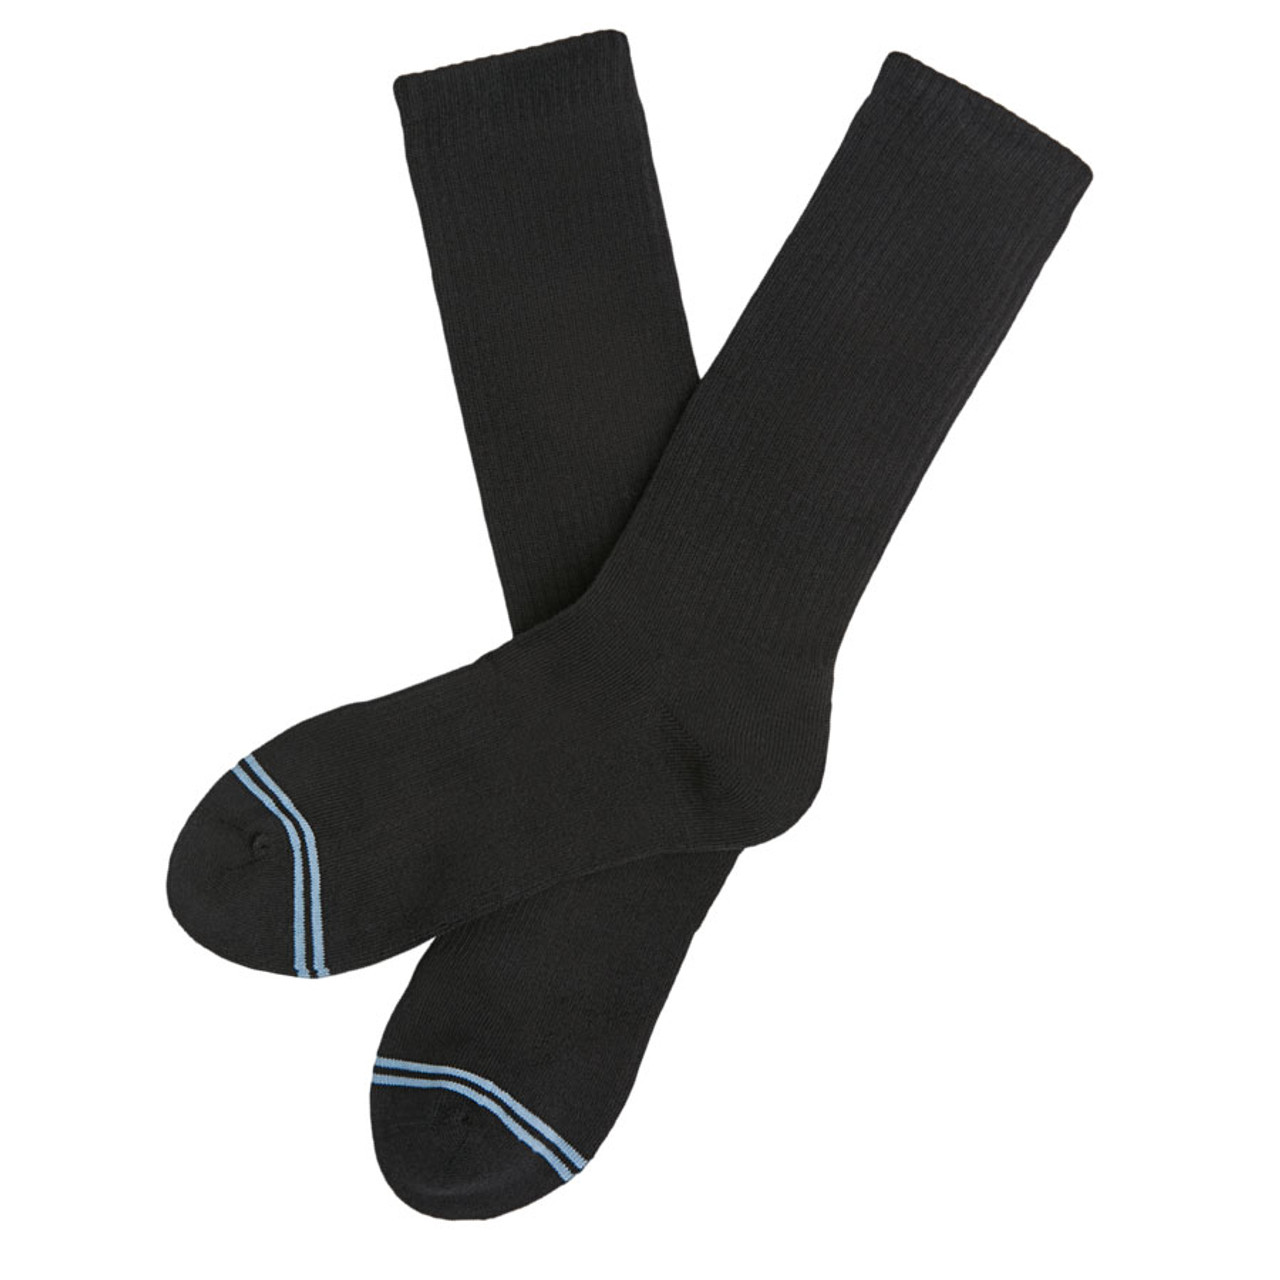 High quality athletic socks from 95% combed Cotton 5% Elastane